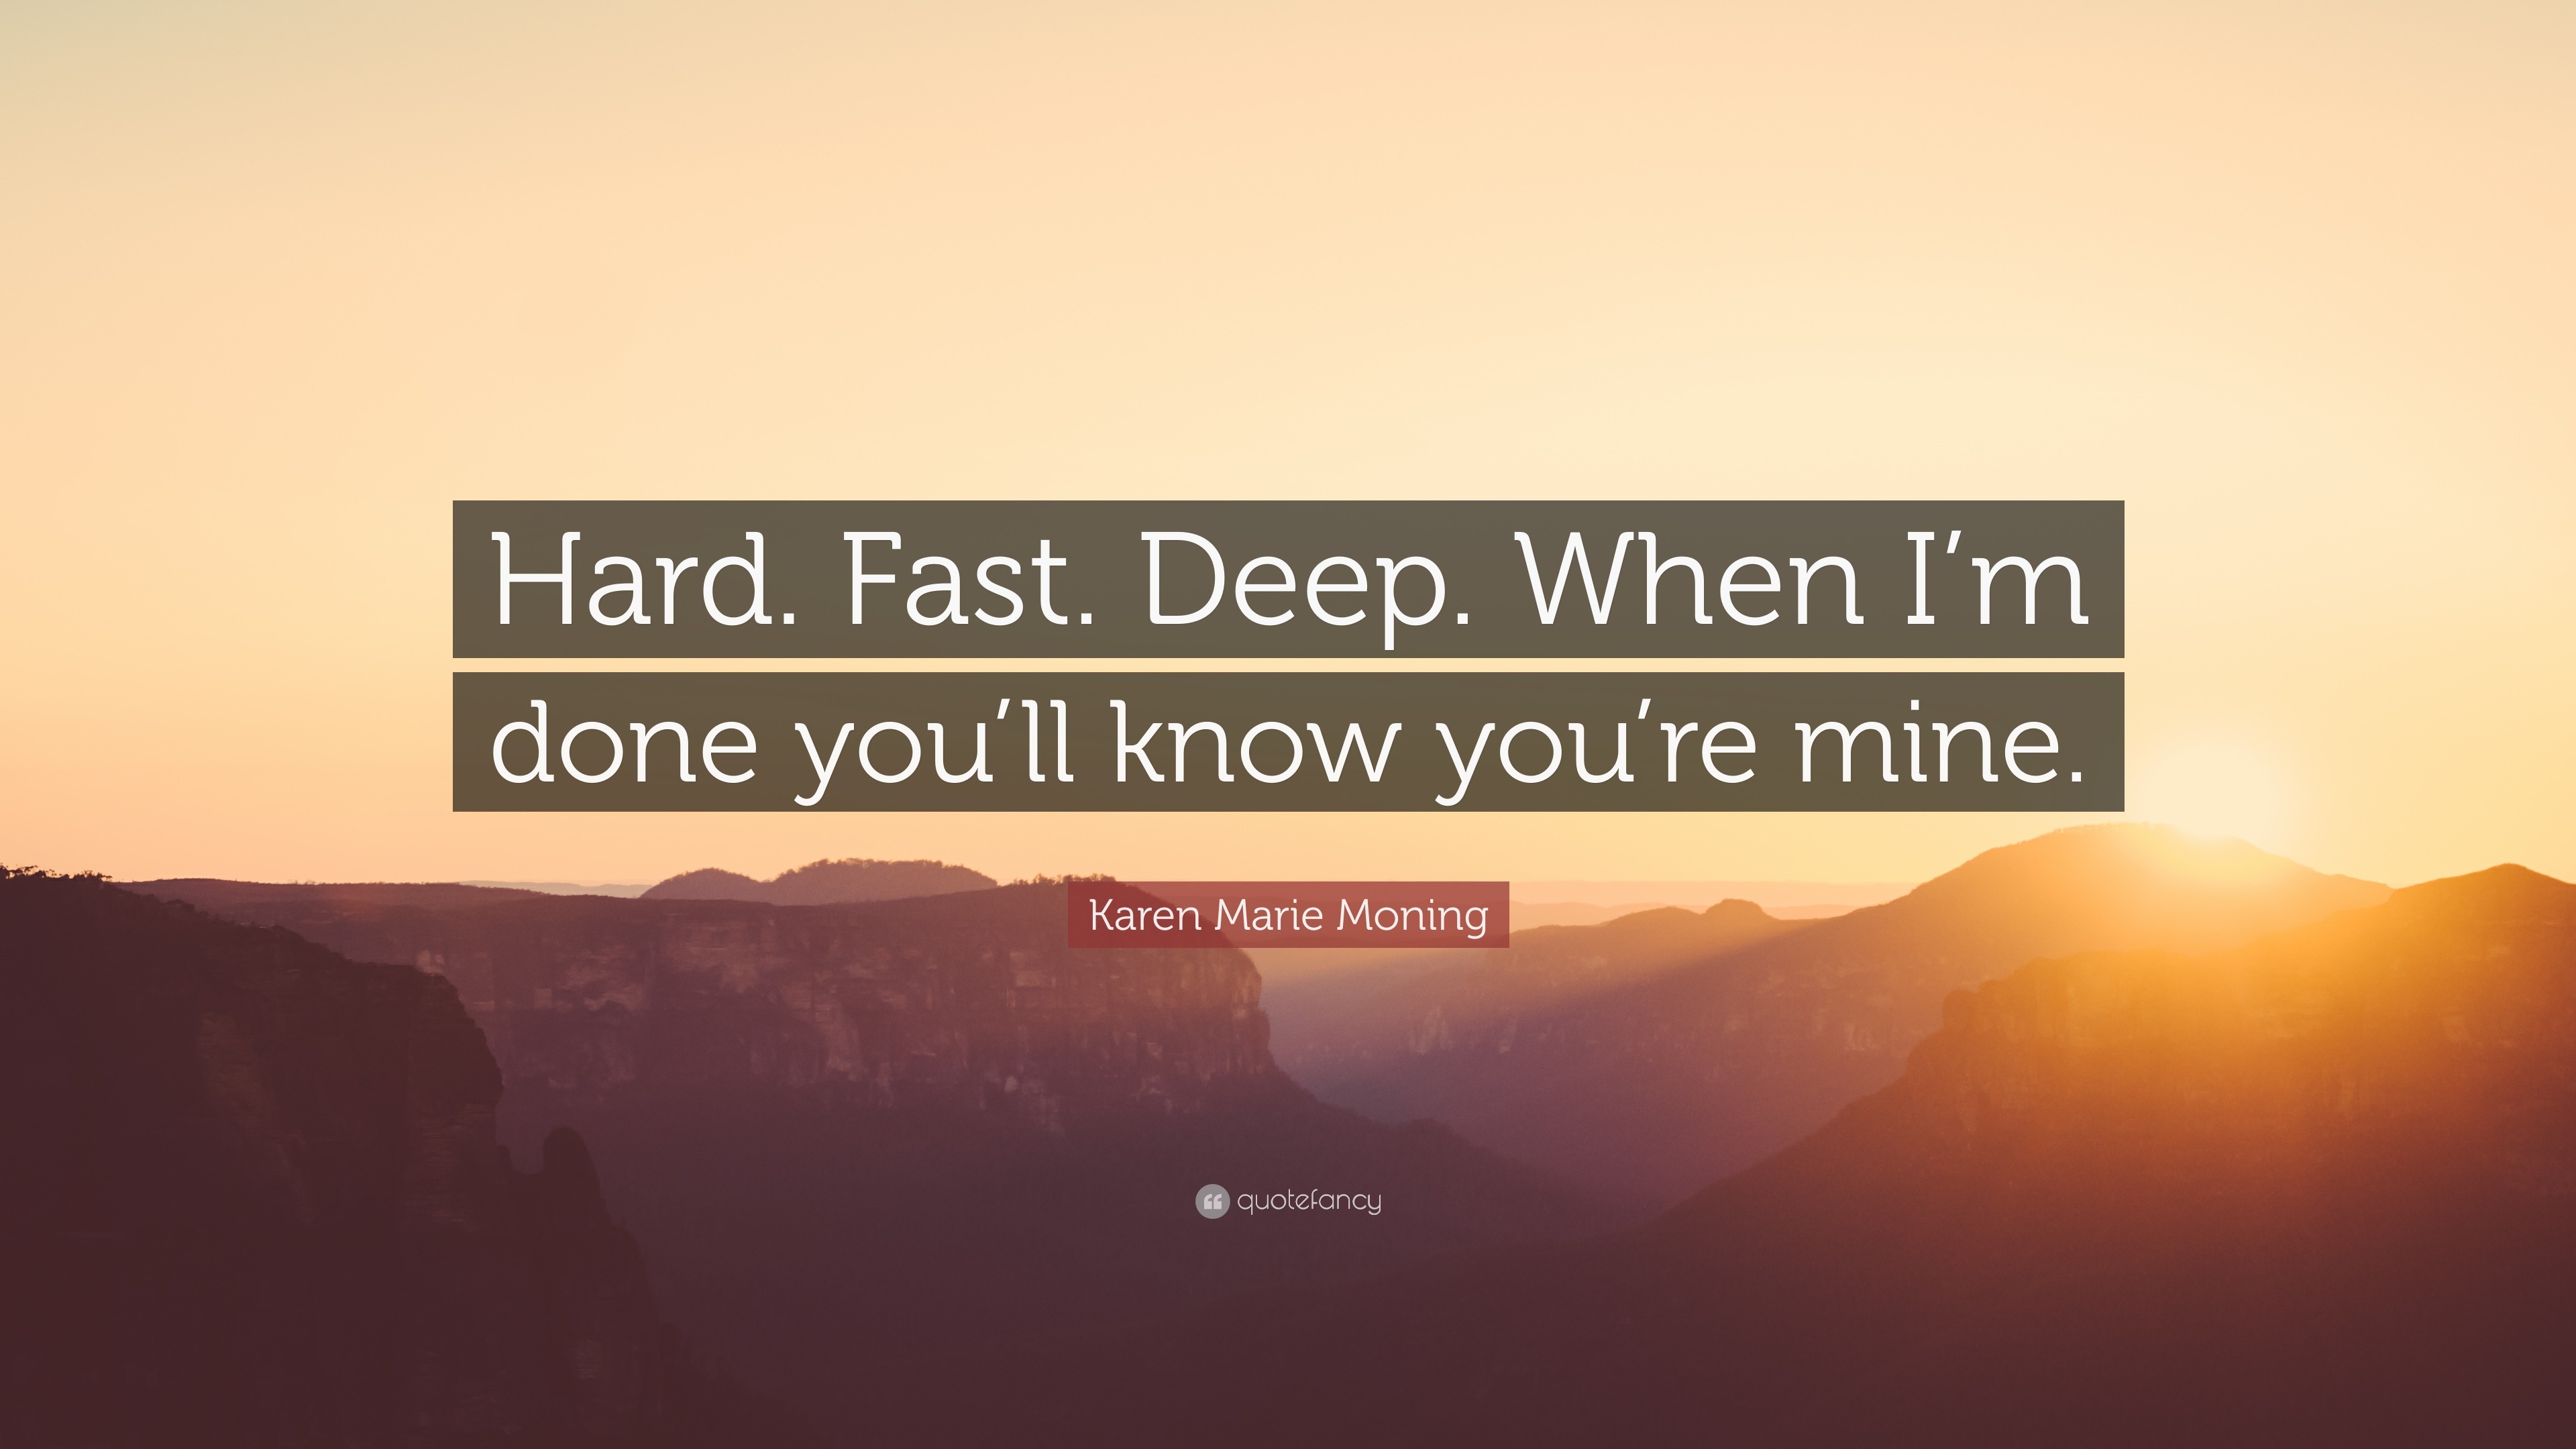 Karen Marie Moning Quote “hard Fast Deep When I’m Done You’ll Know You’re Mine ”